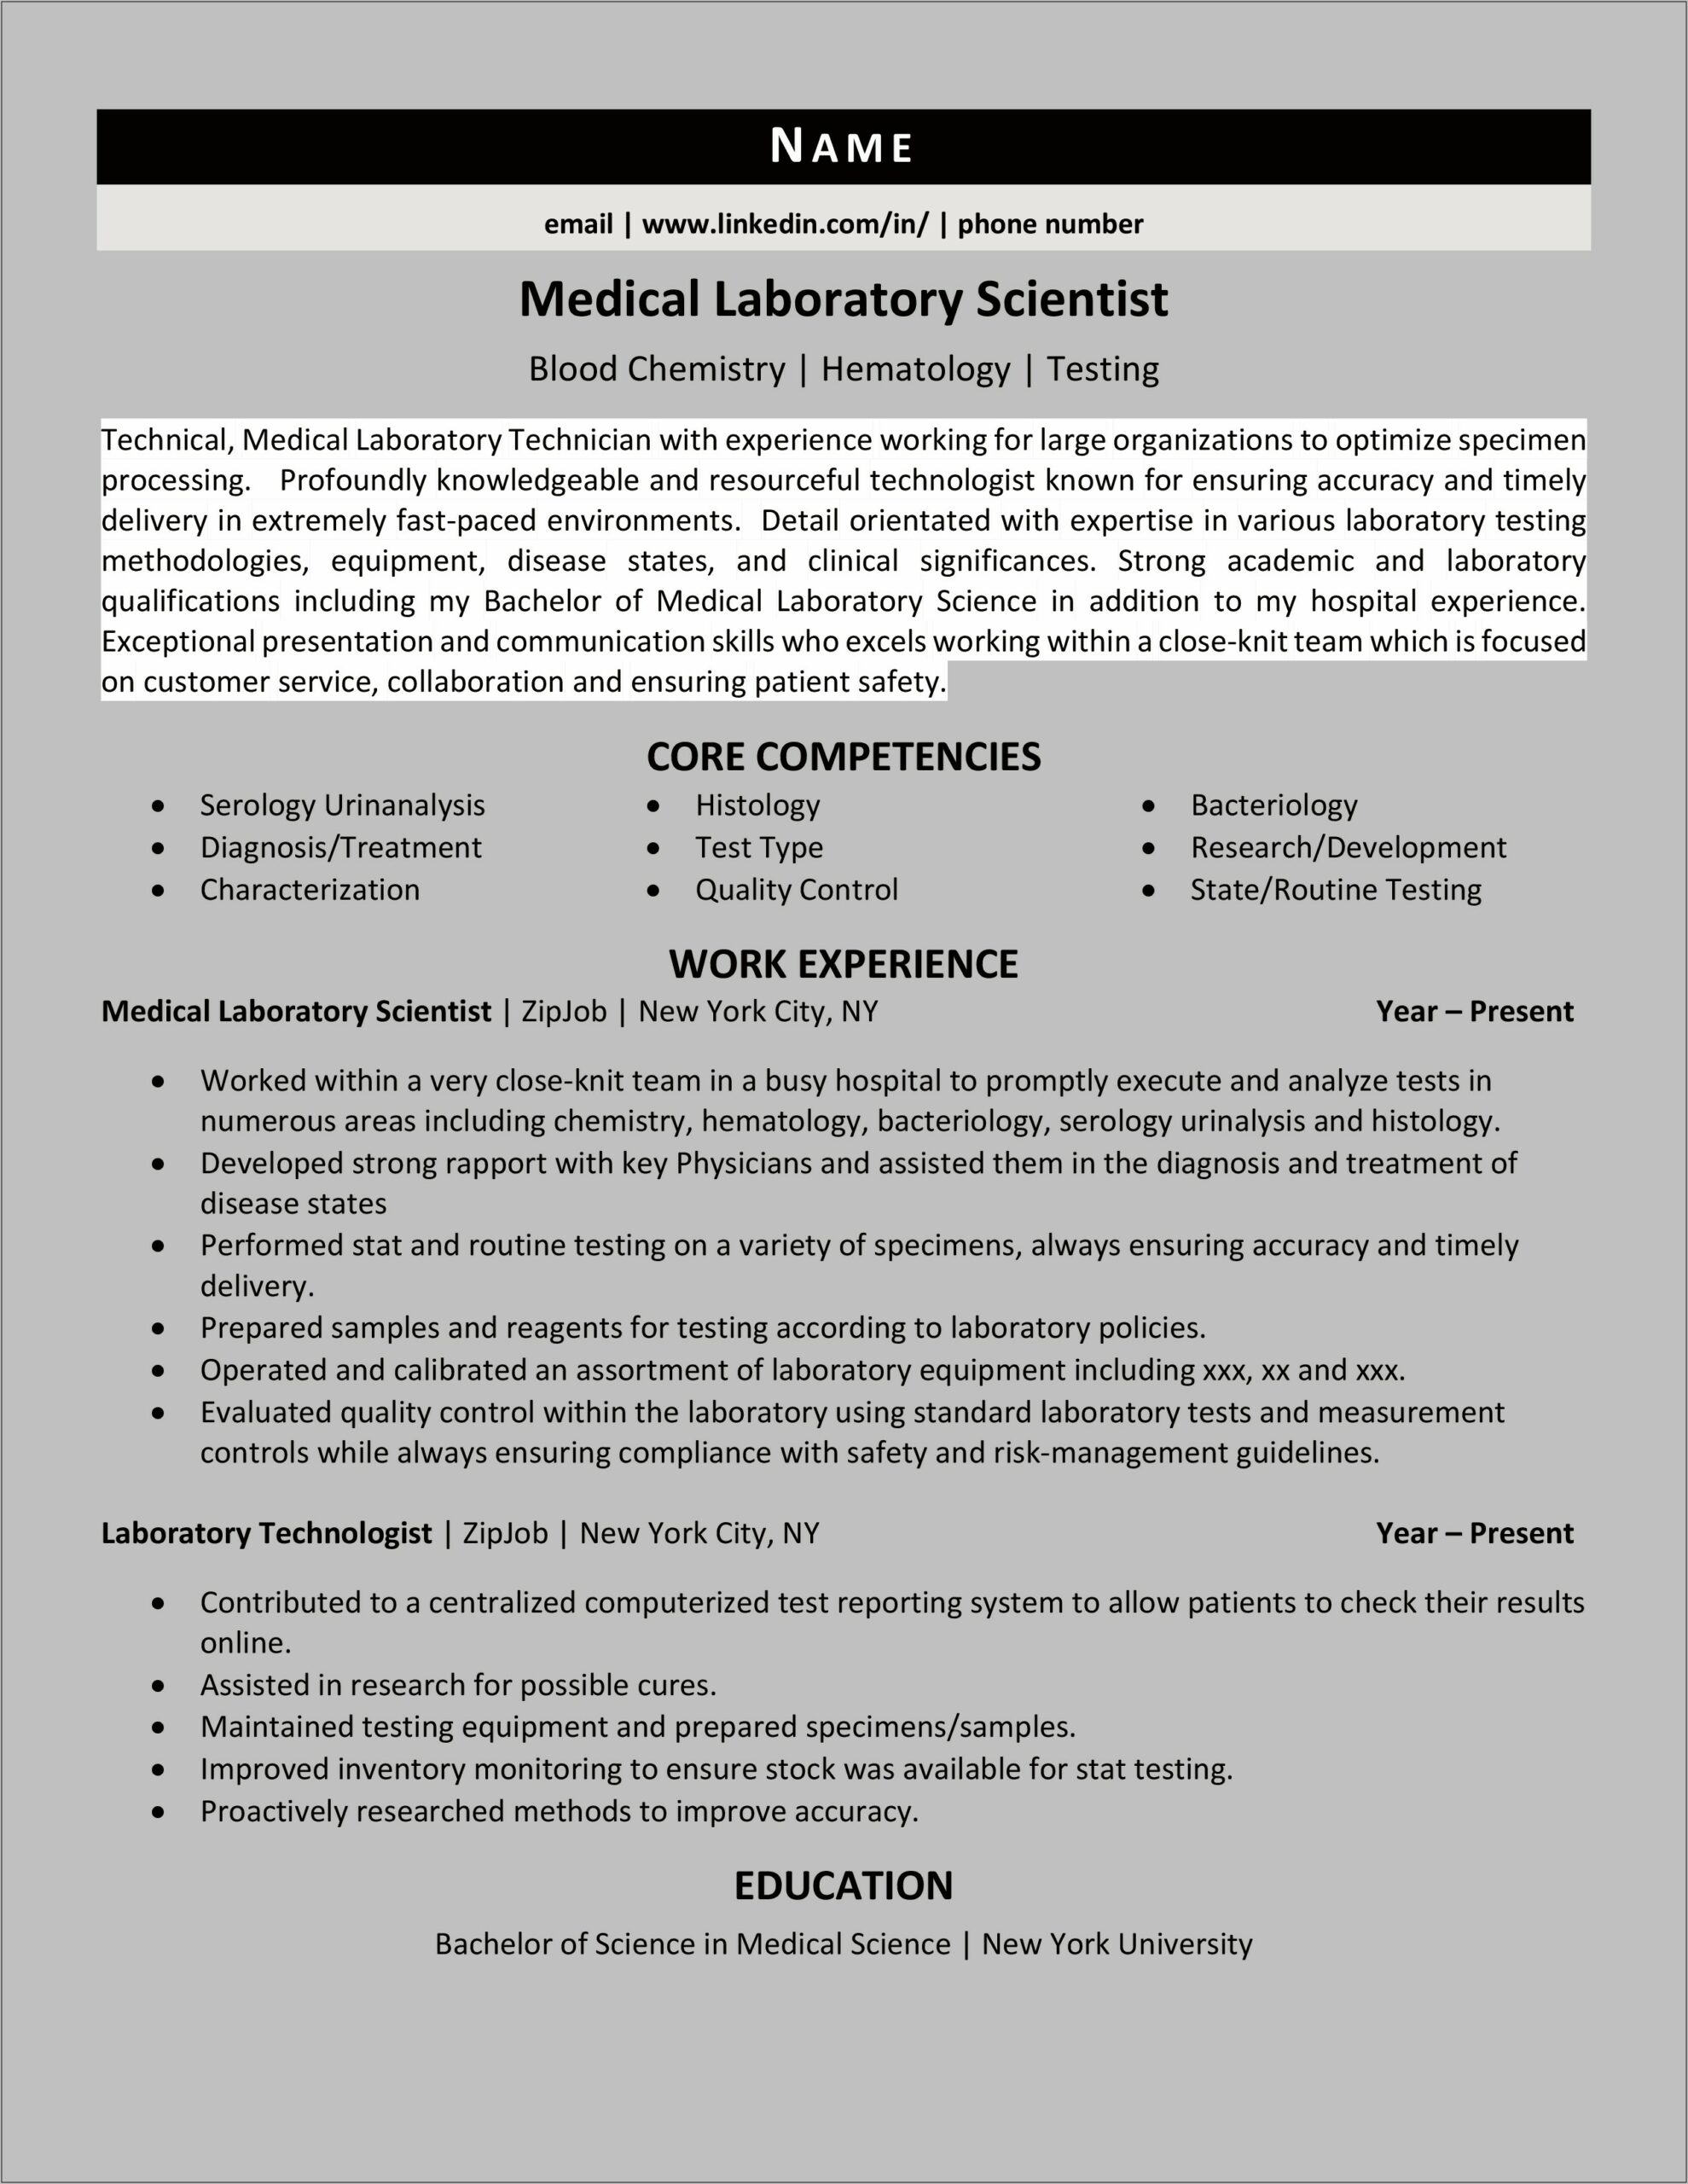 Resume Objective Statement For Medical Laboratory Tech